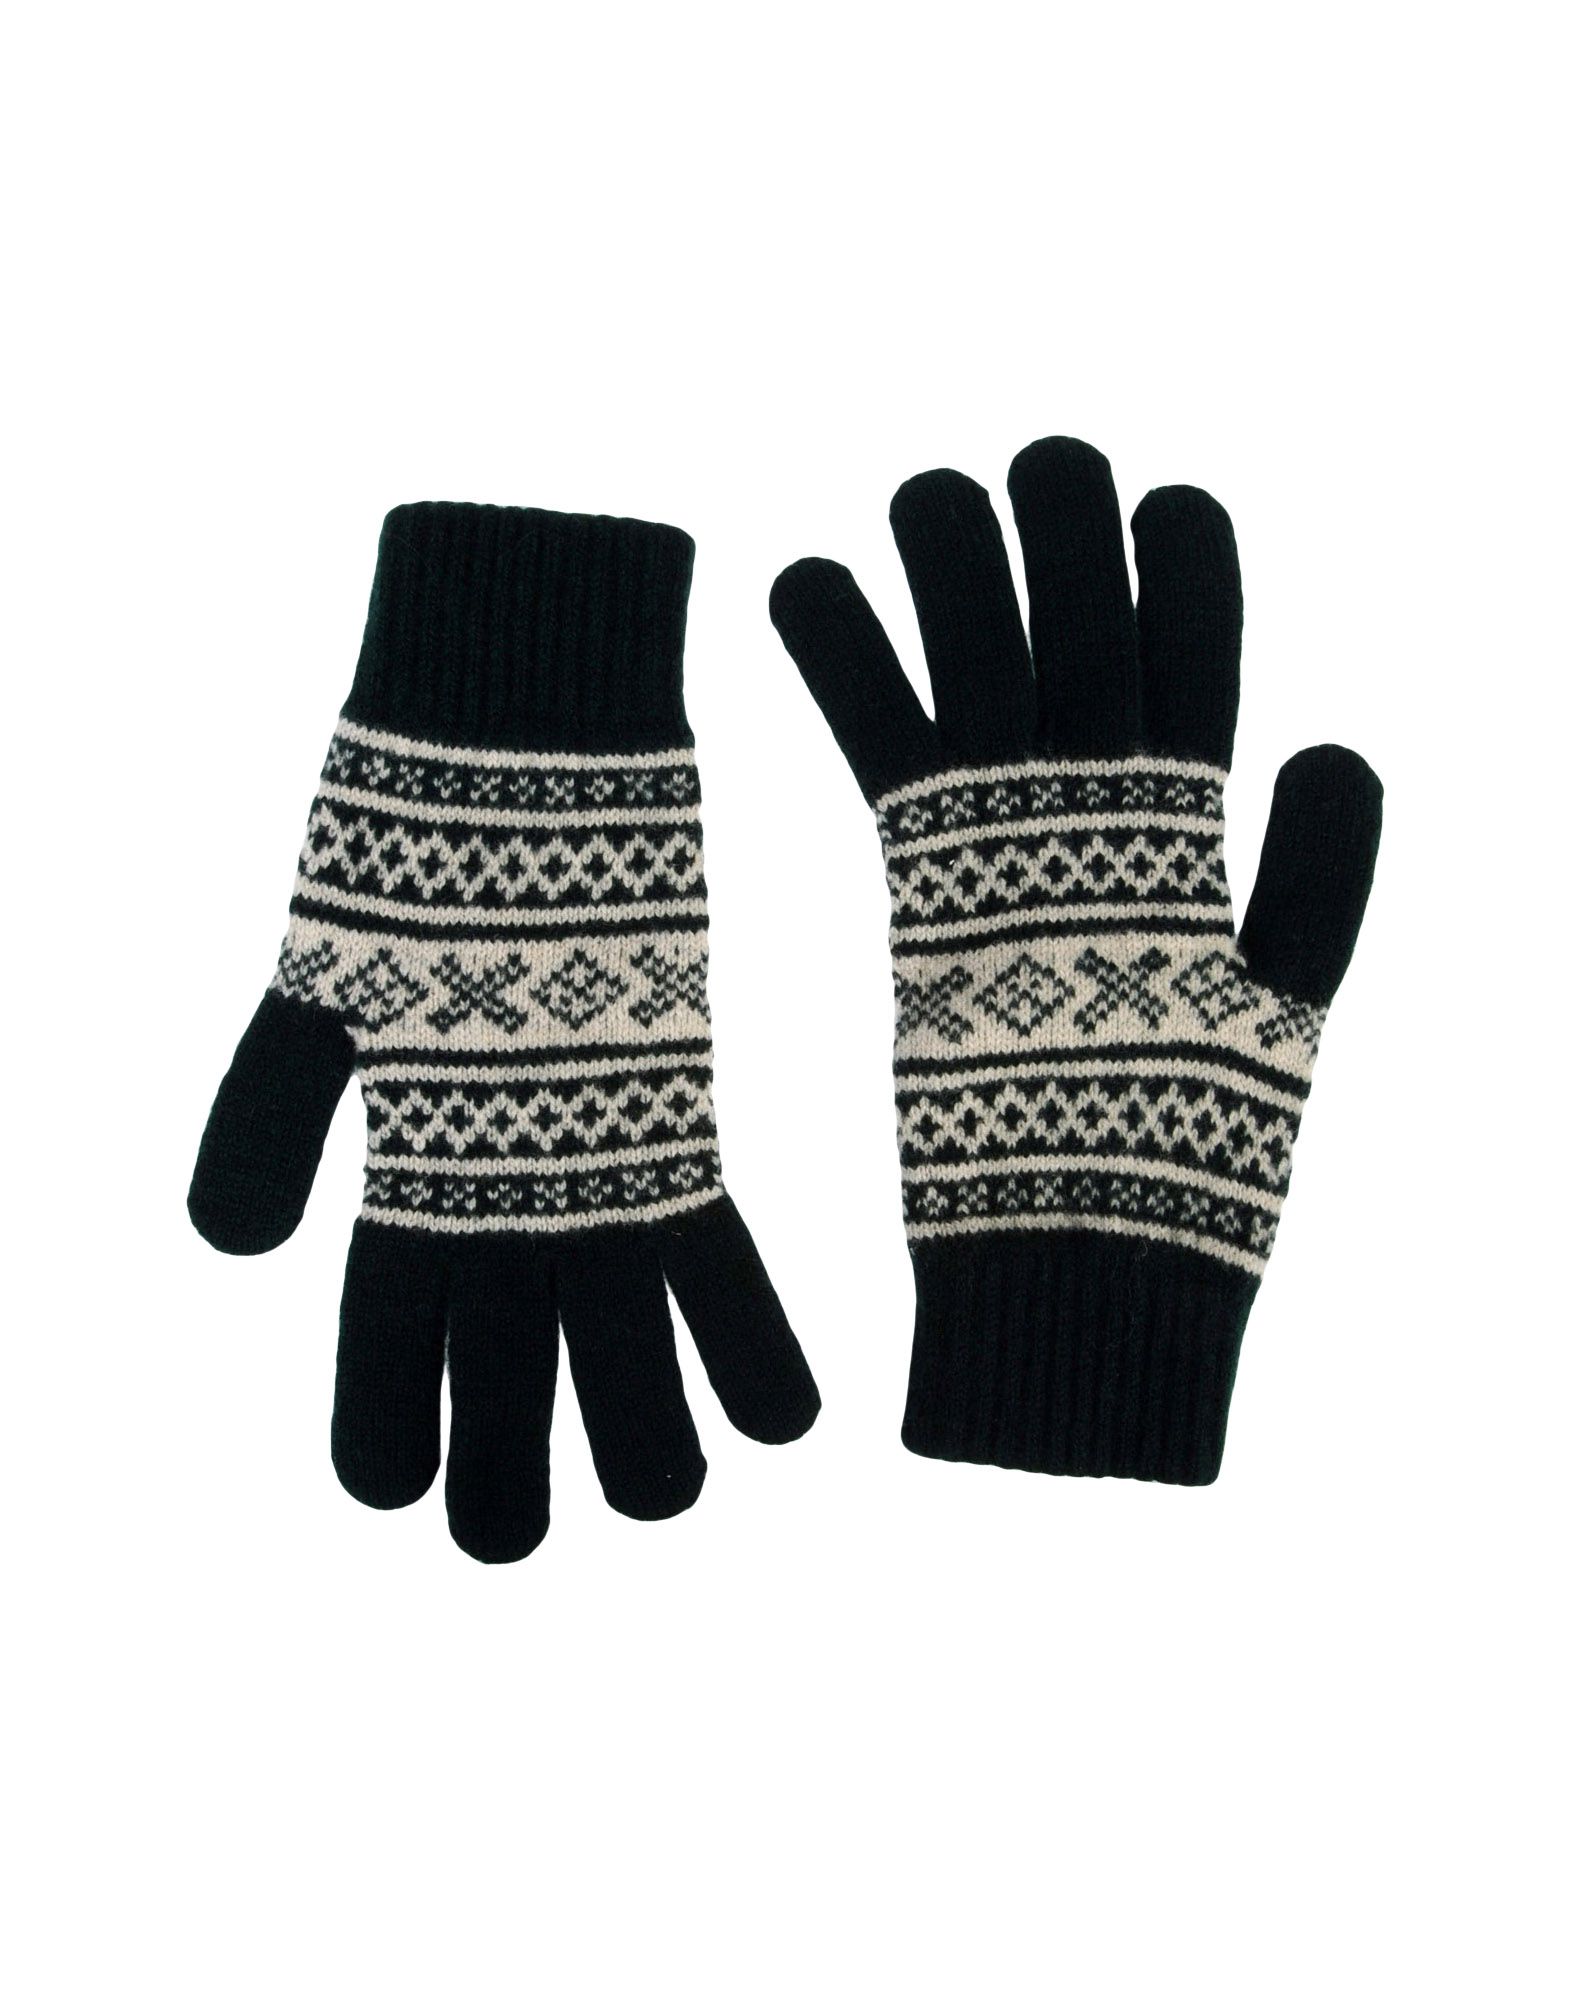 Foto Ymc You Must Create Guantes Mujer Verde oscuro